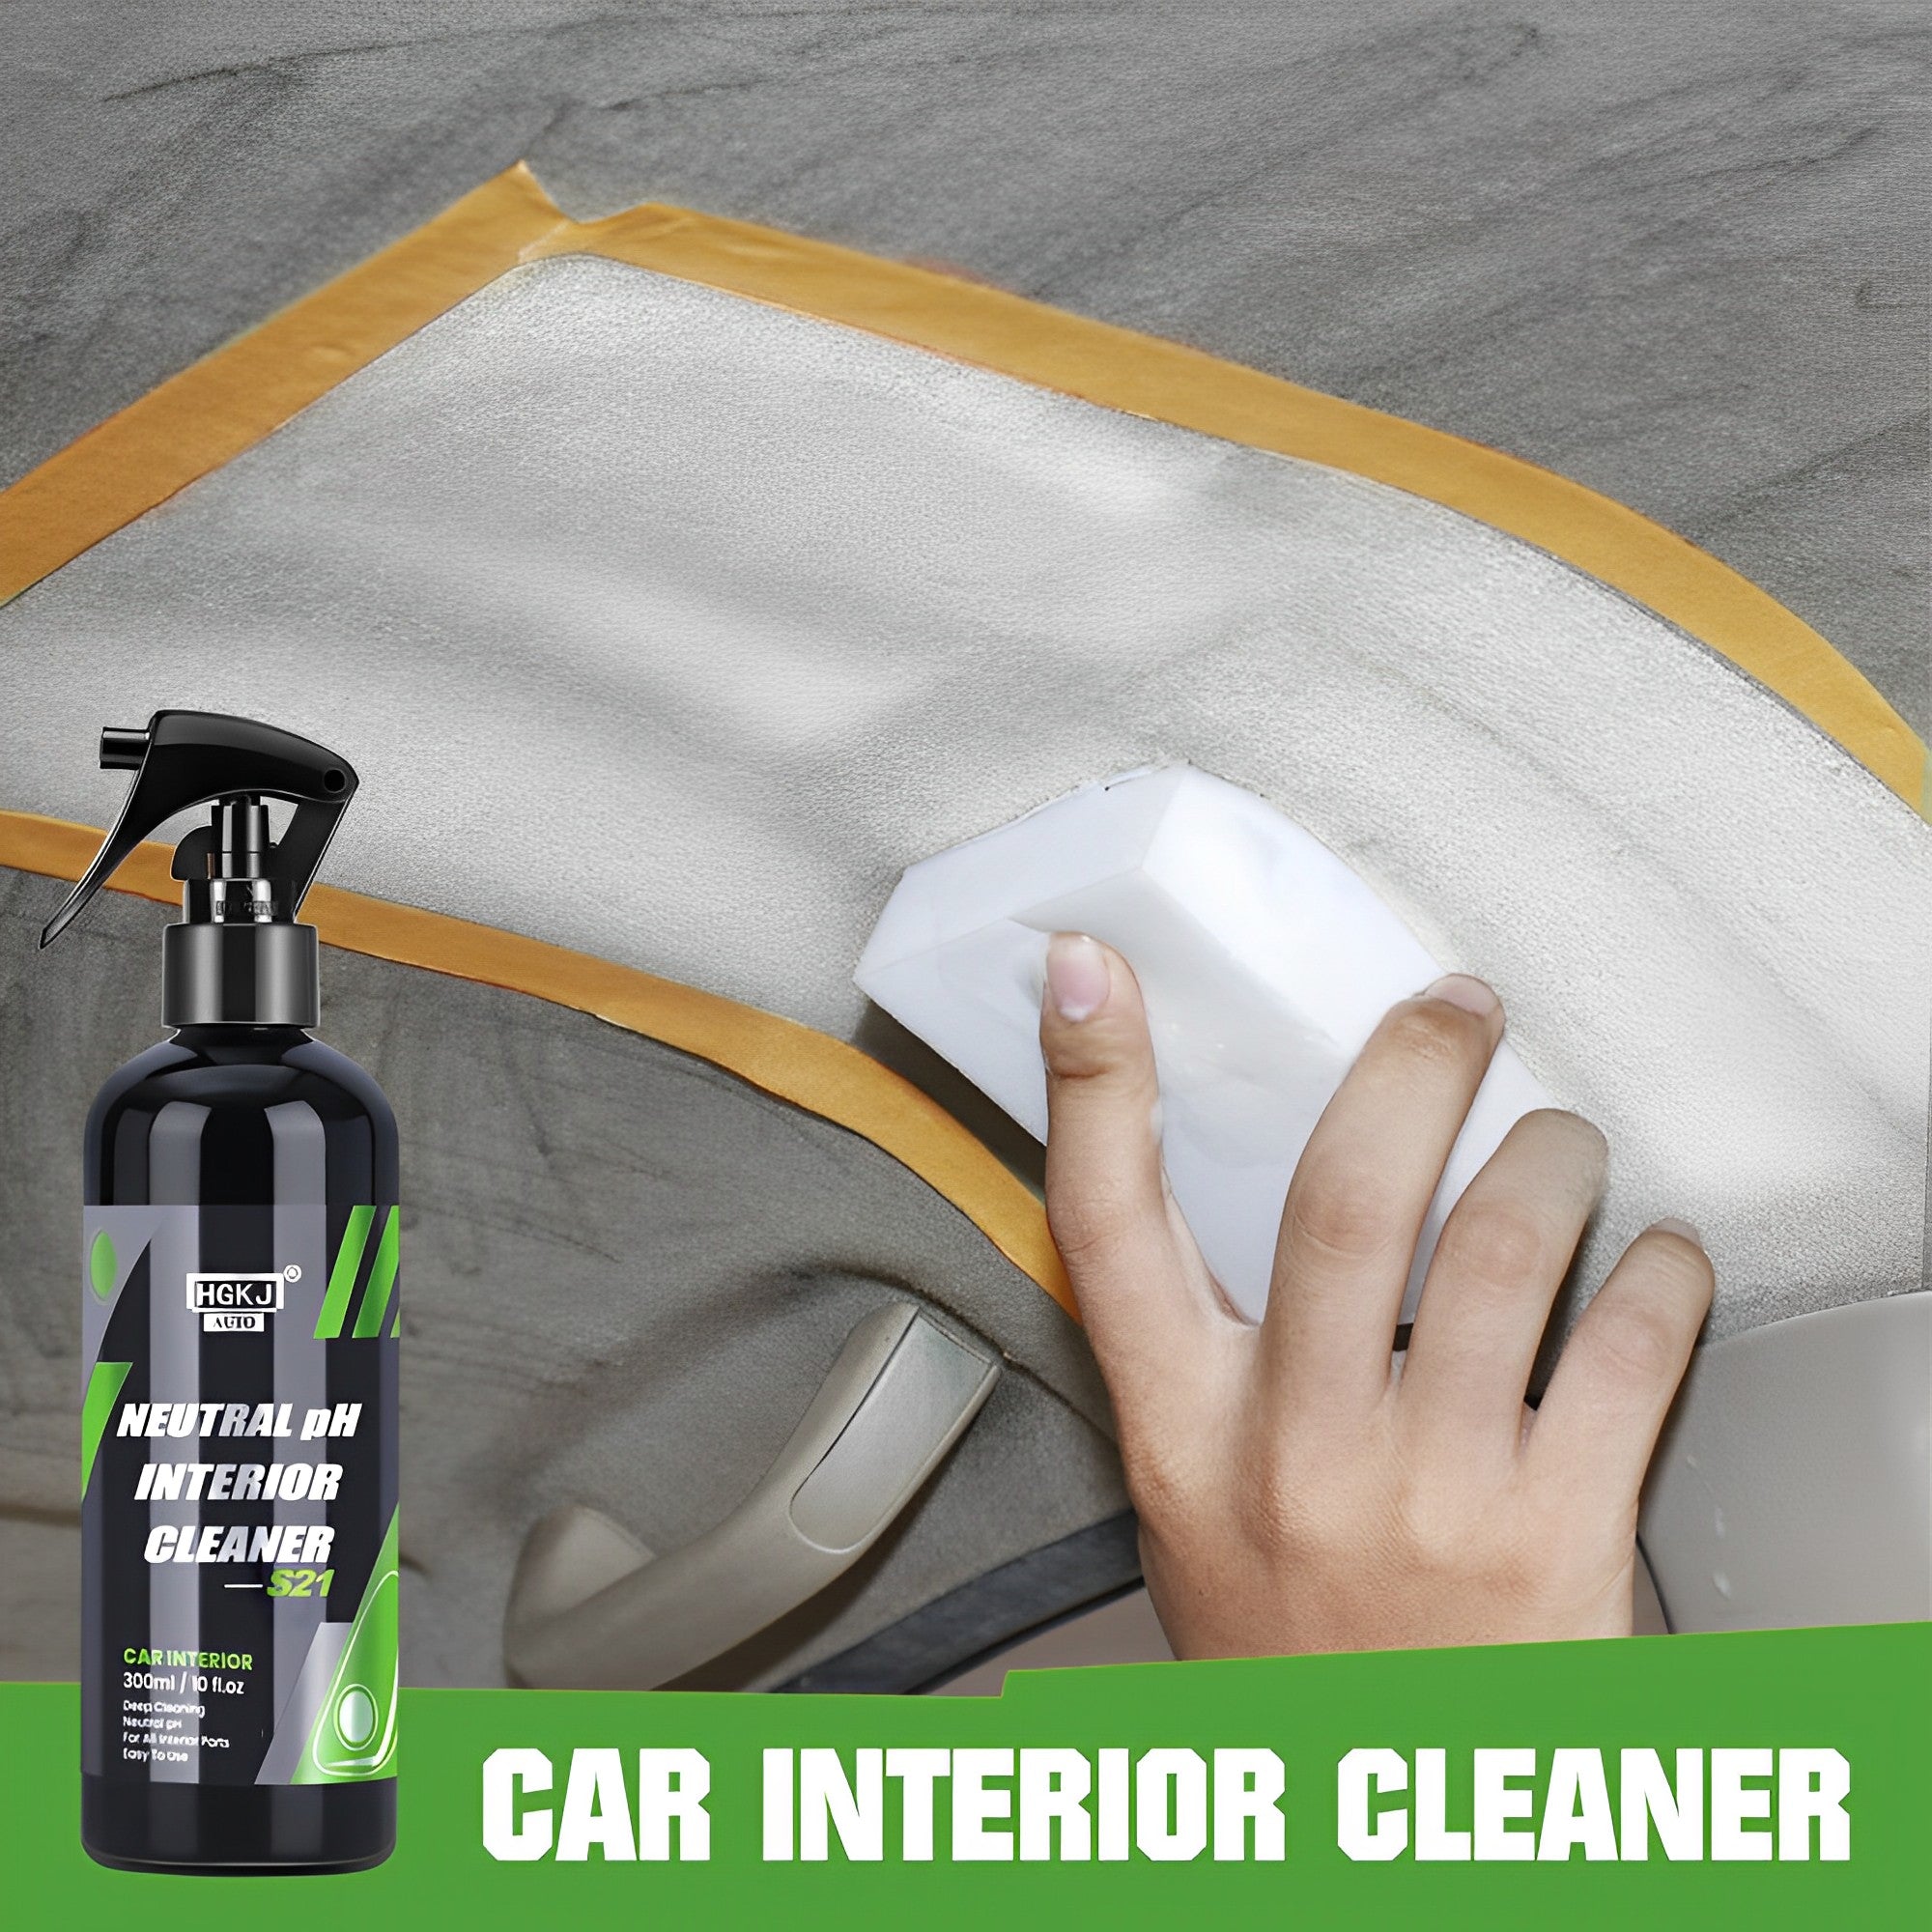 Top 10 Everyday Hacks To Keep Your Car Interior Clean – Phoenix E.O.D.